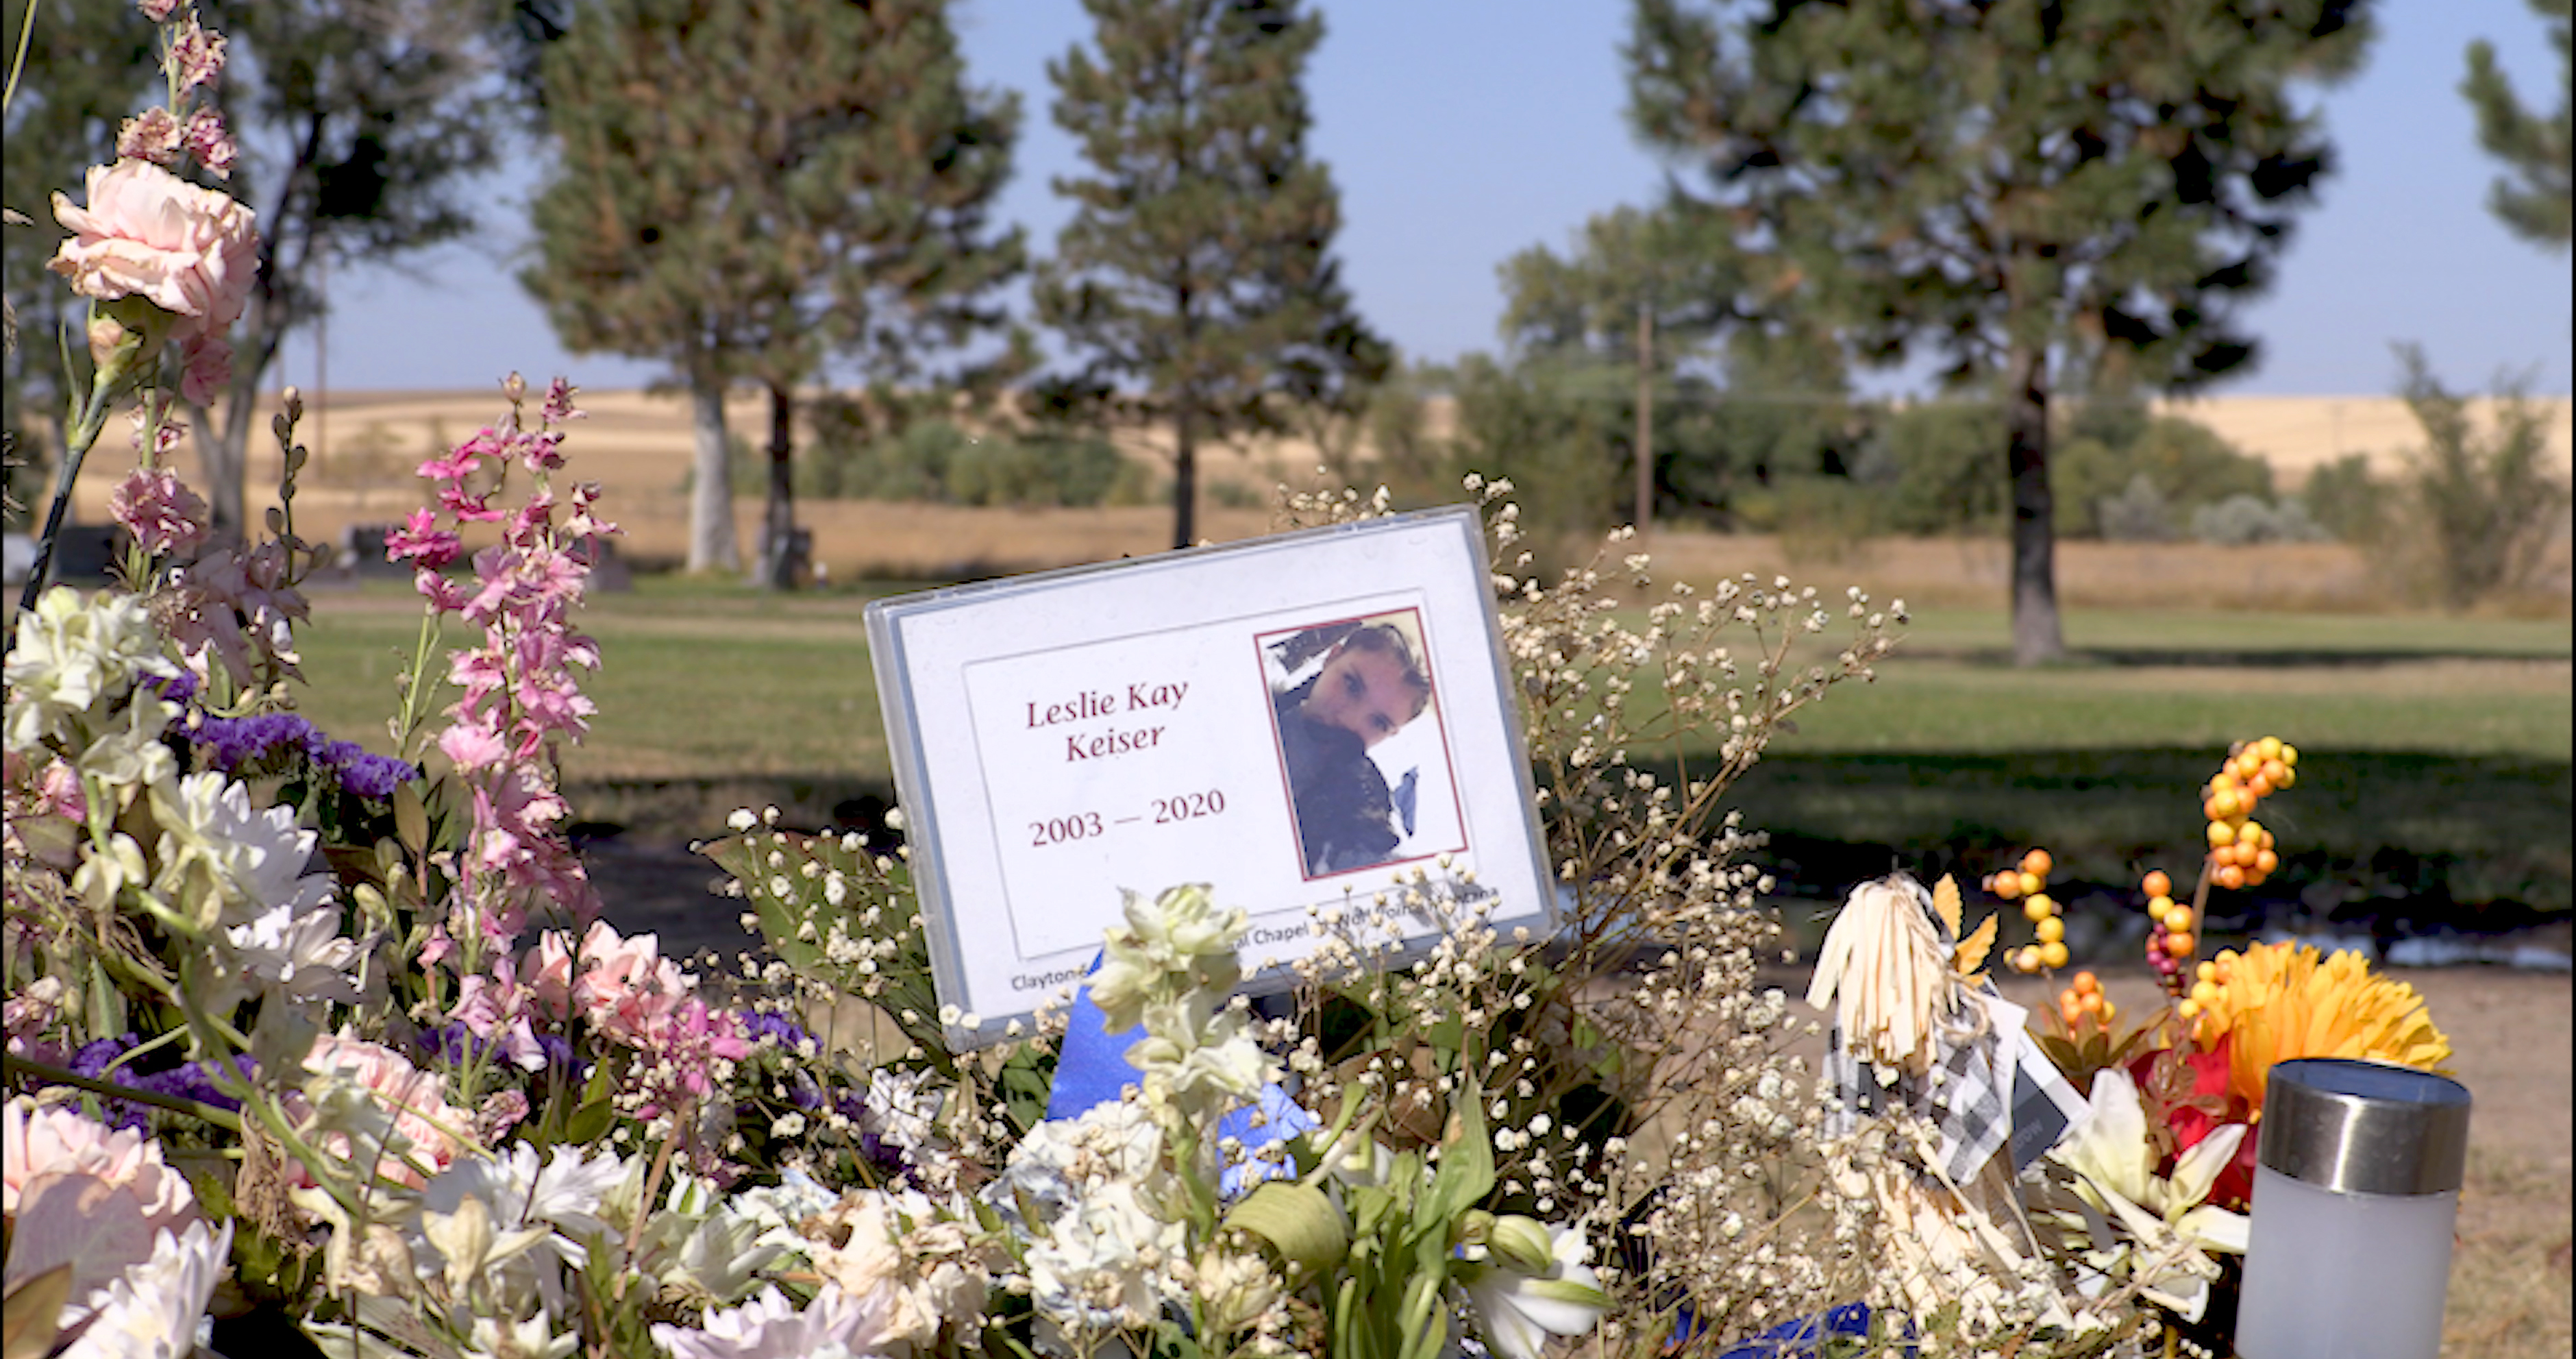 Leslie Keiser’s grave is at the edge of Wolf Point, a small community on the Fort Peck Indian Reservation in Montana. Leslie is one of at least two teenagers on the reservation who reportedly died by suicide this summer. (Sara Reardon)